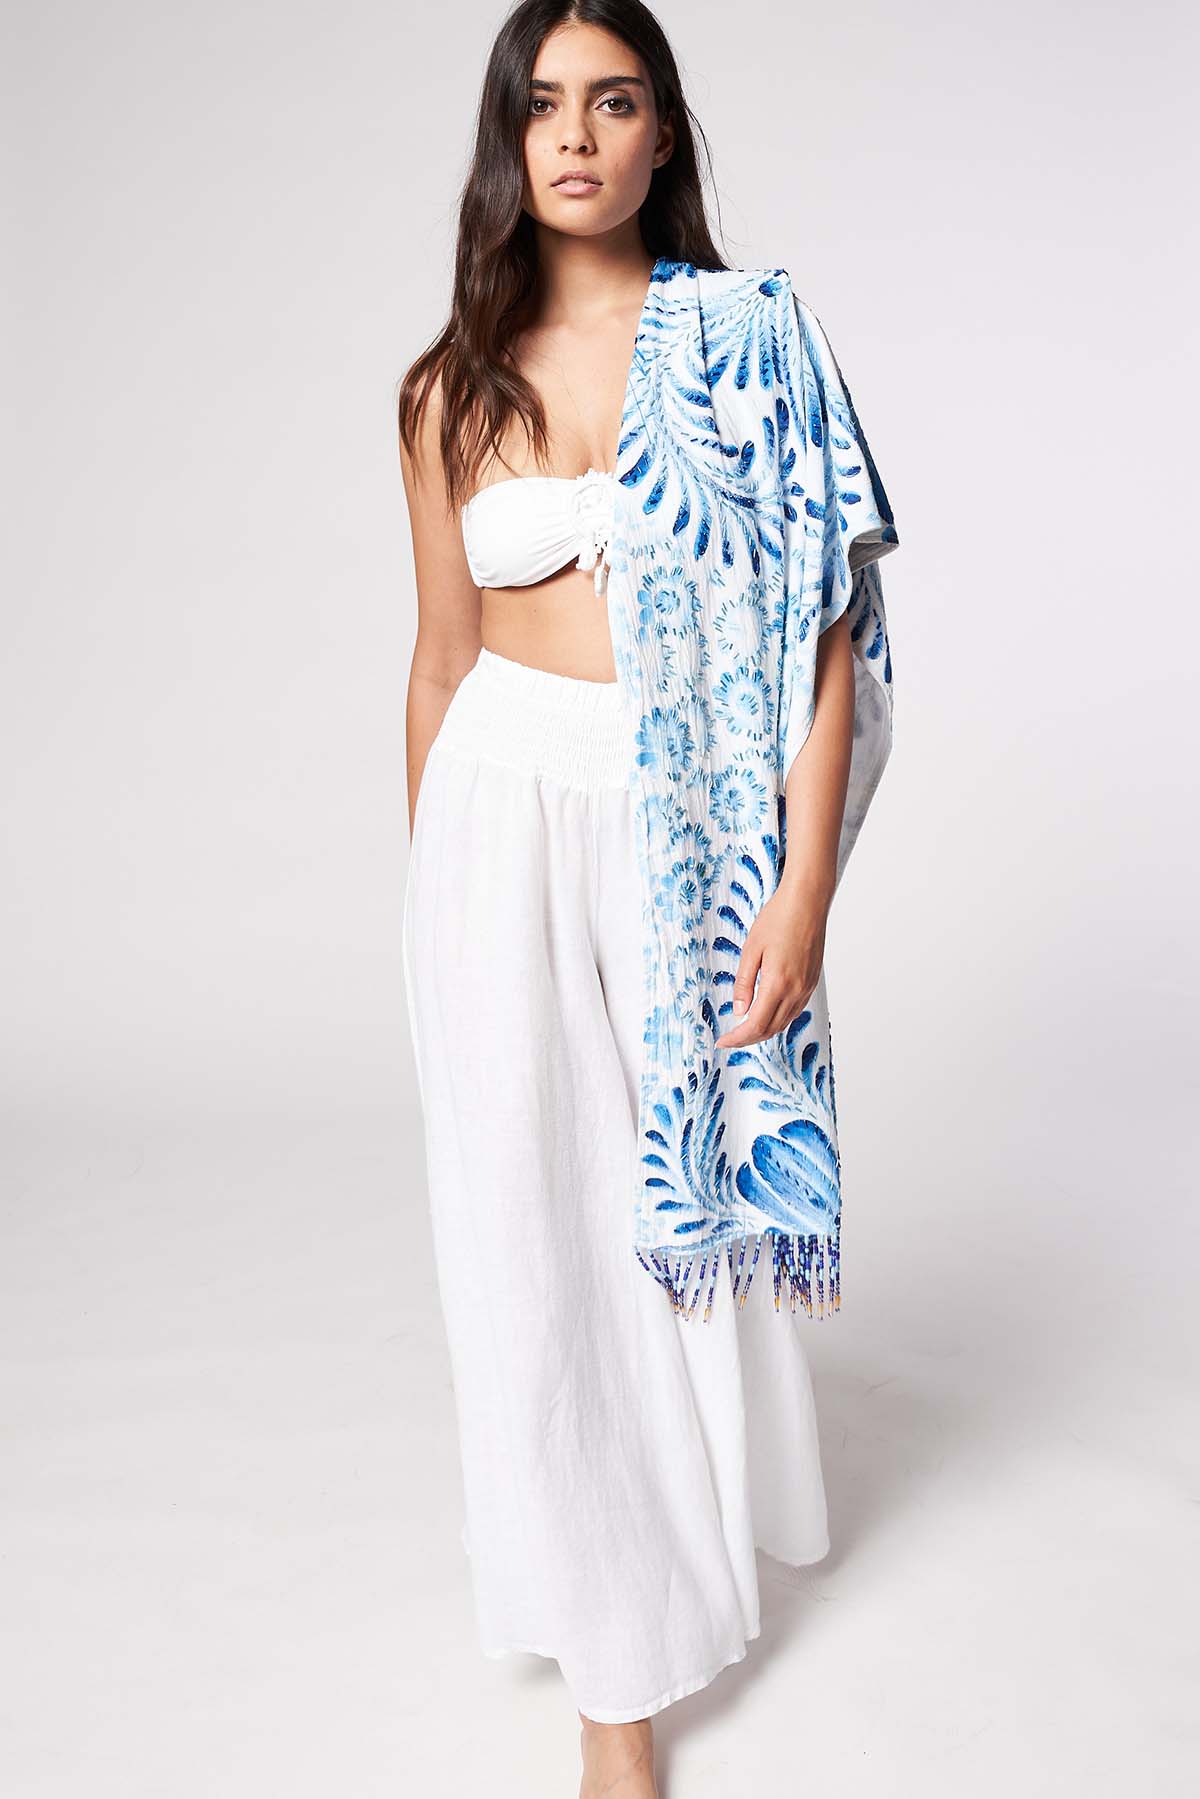 HAND-PAINTED AND HAND-EMBROIDERED SHAWL WITH BEADED FRINGE - TALAVERA AZUL